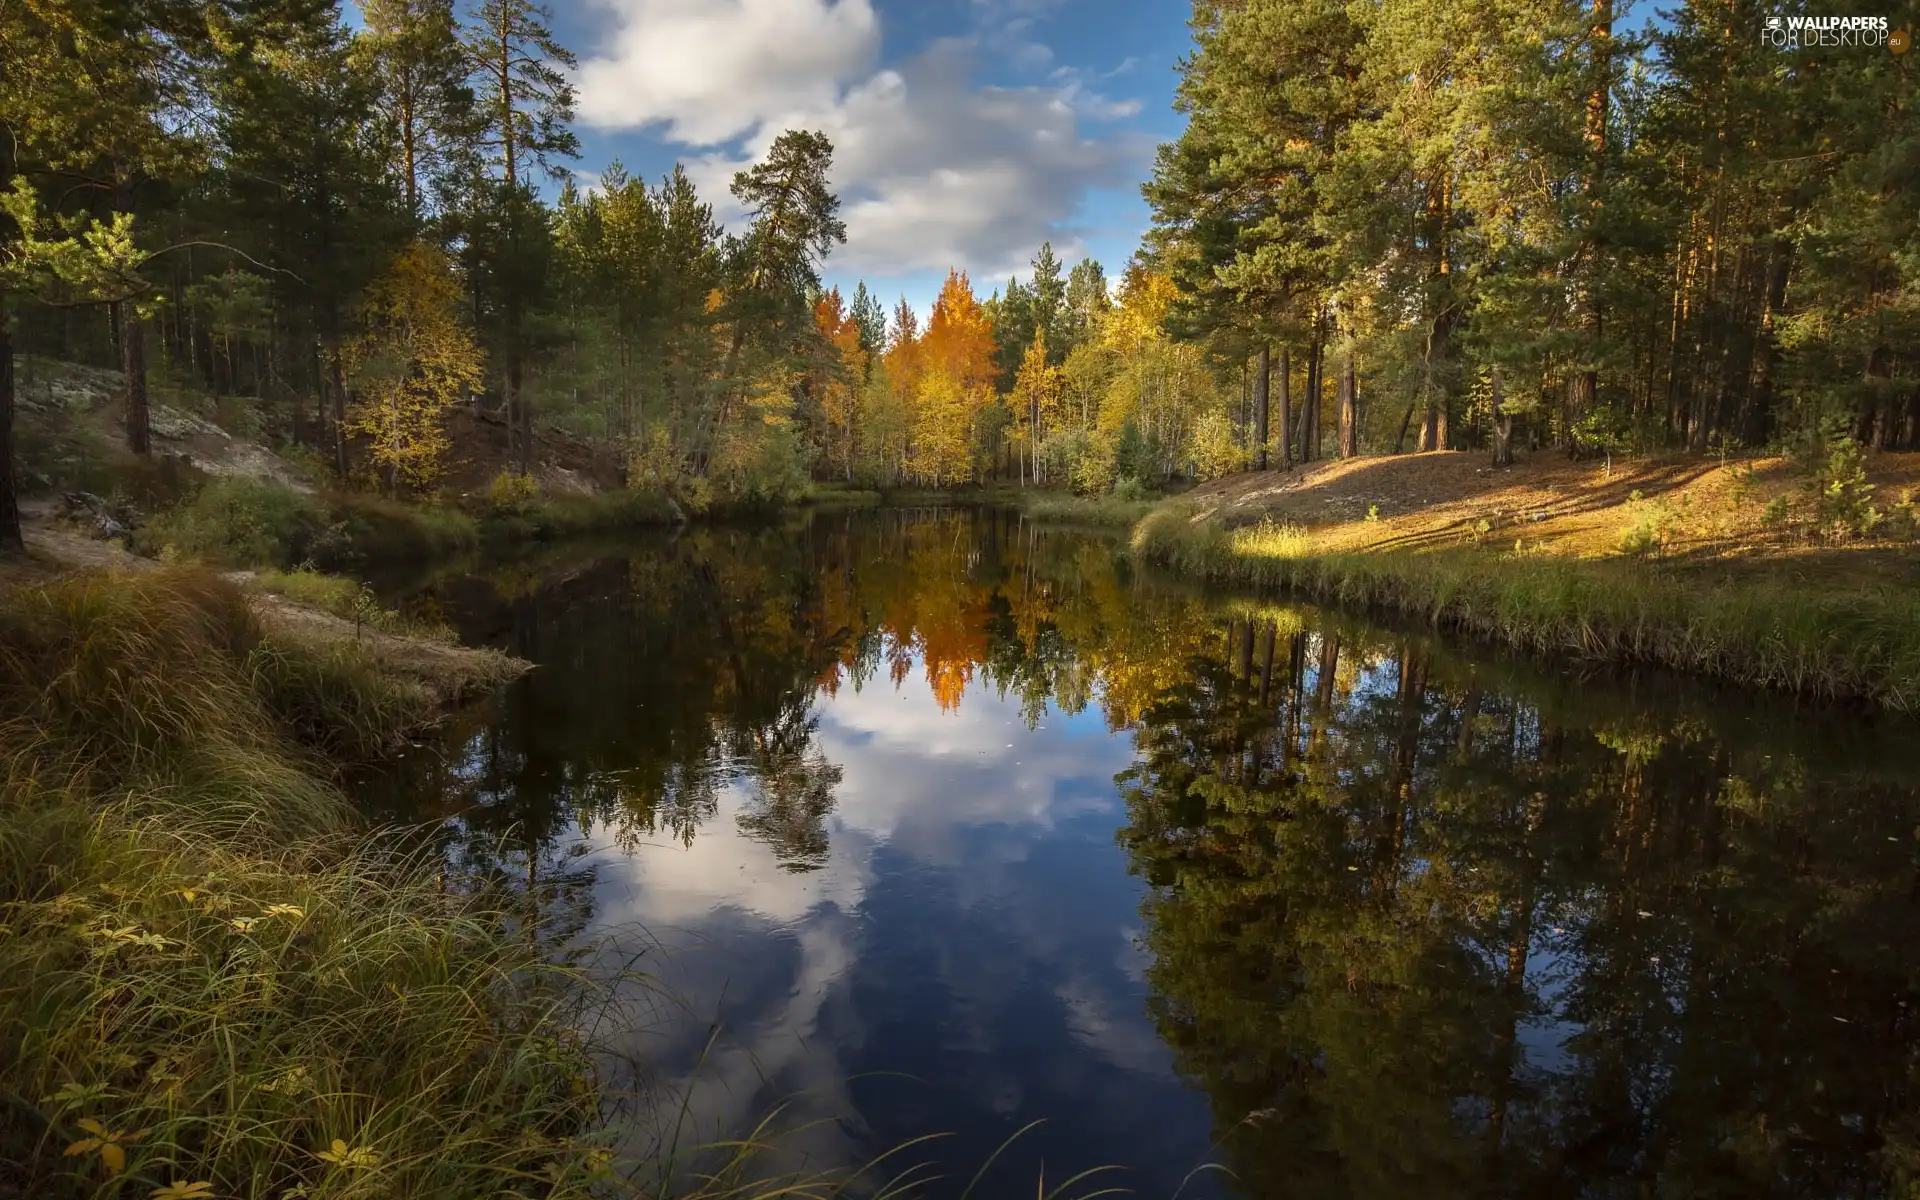 viewes, River, sunny, trees, forest, reflection, day